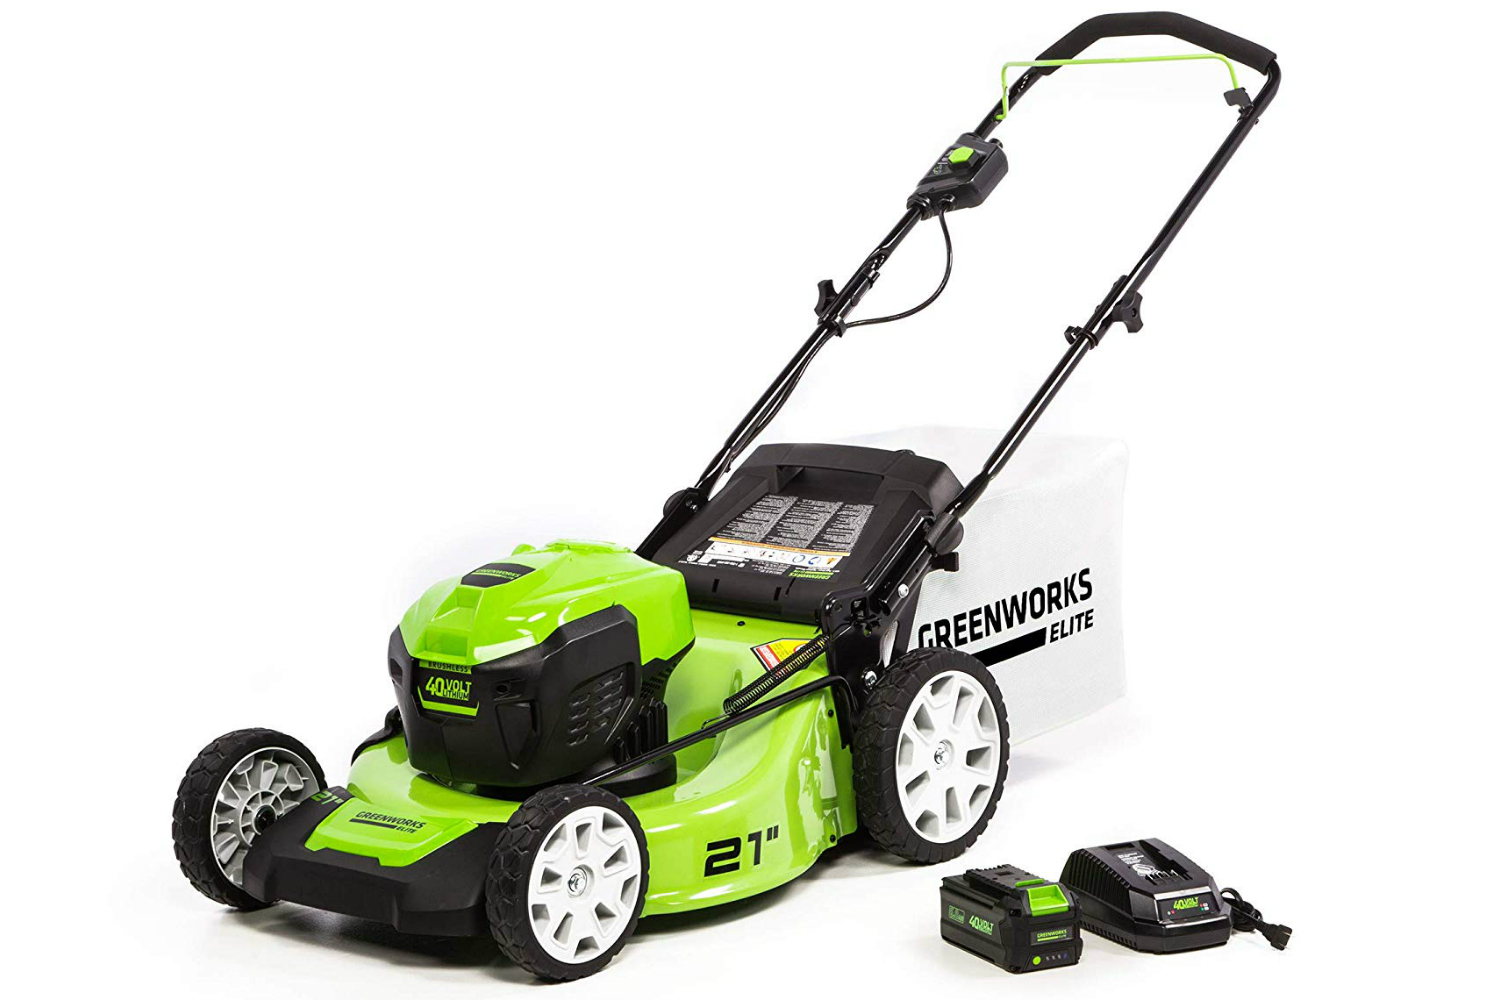 amazon deals on greenworks pressure washers and yard tools 21 inch 40v brushless push mower 6ah battery charger included m 21